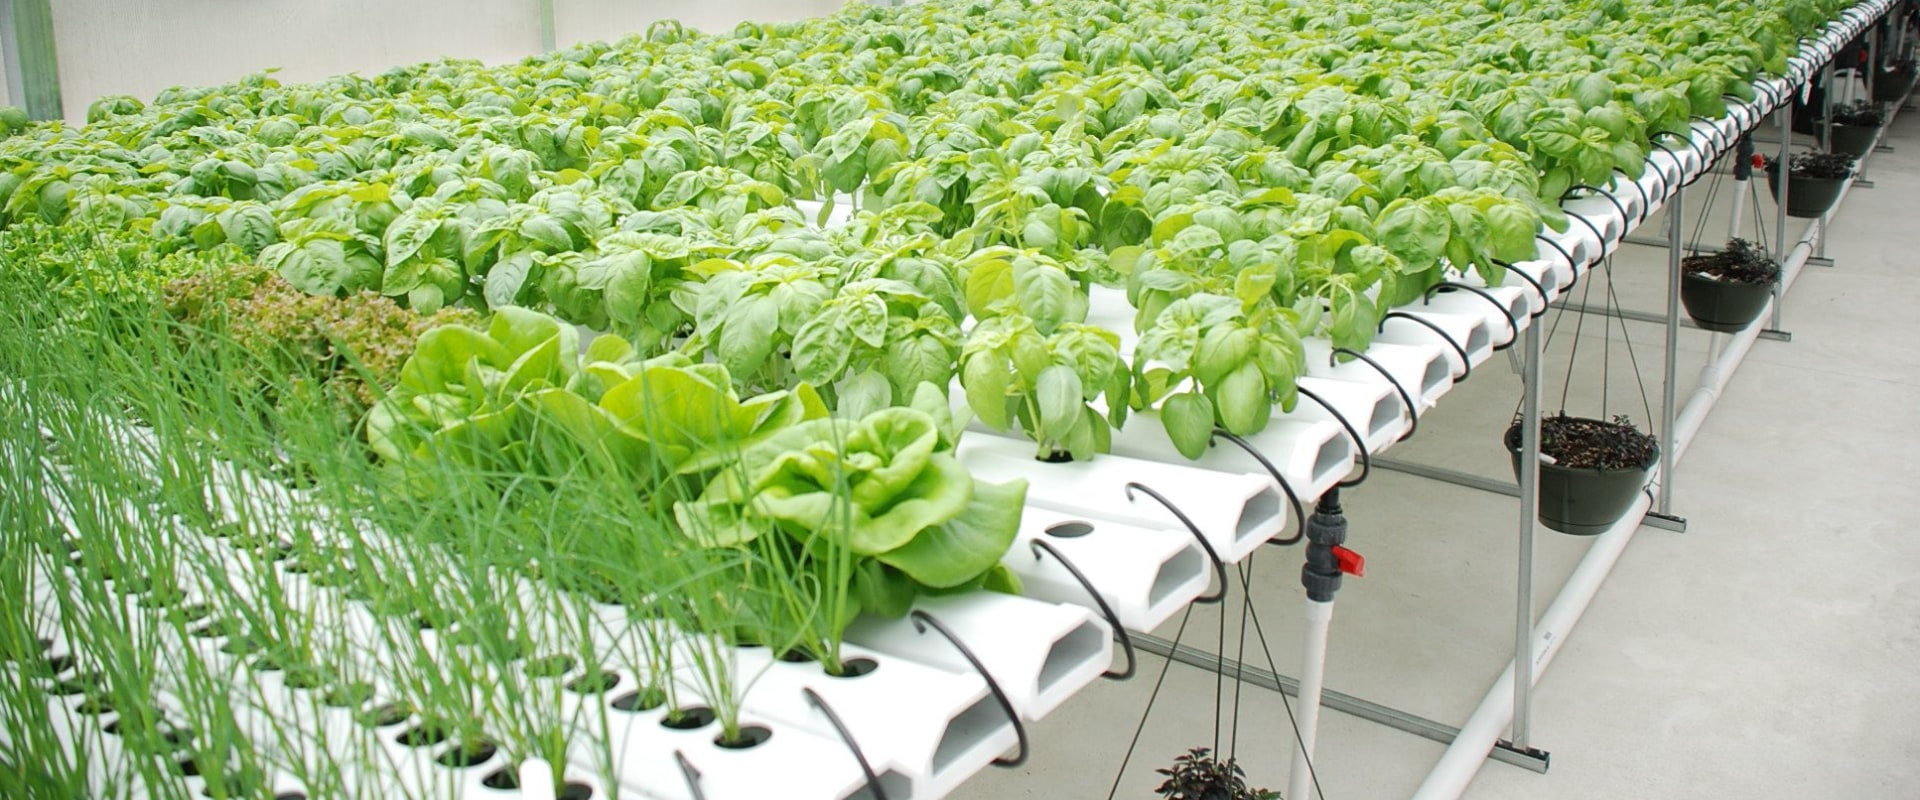 High-Tech Automated Systems for Hydroponic Gardening